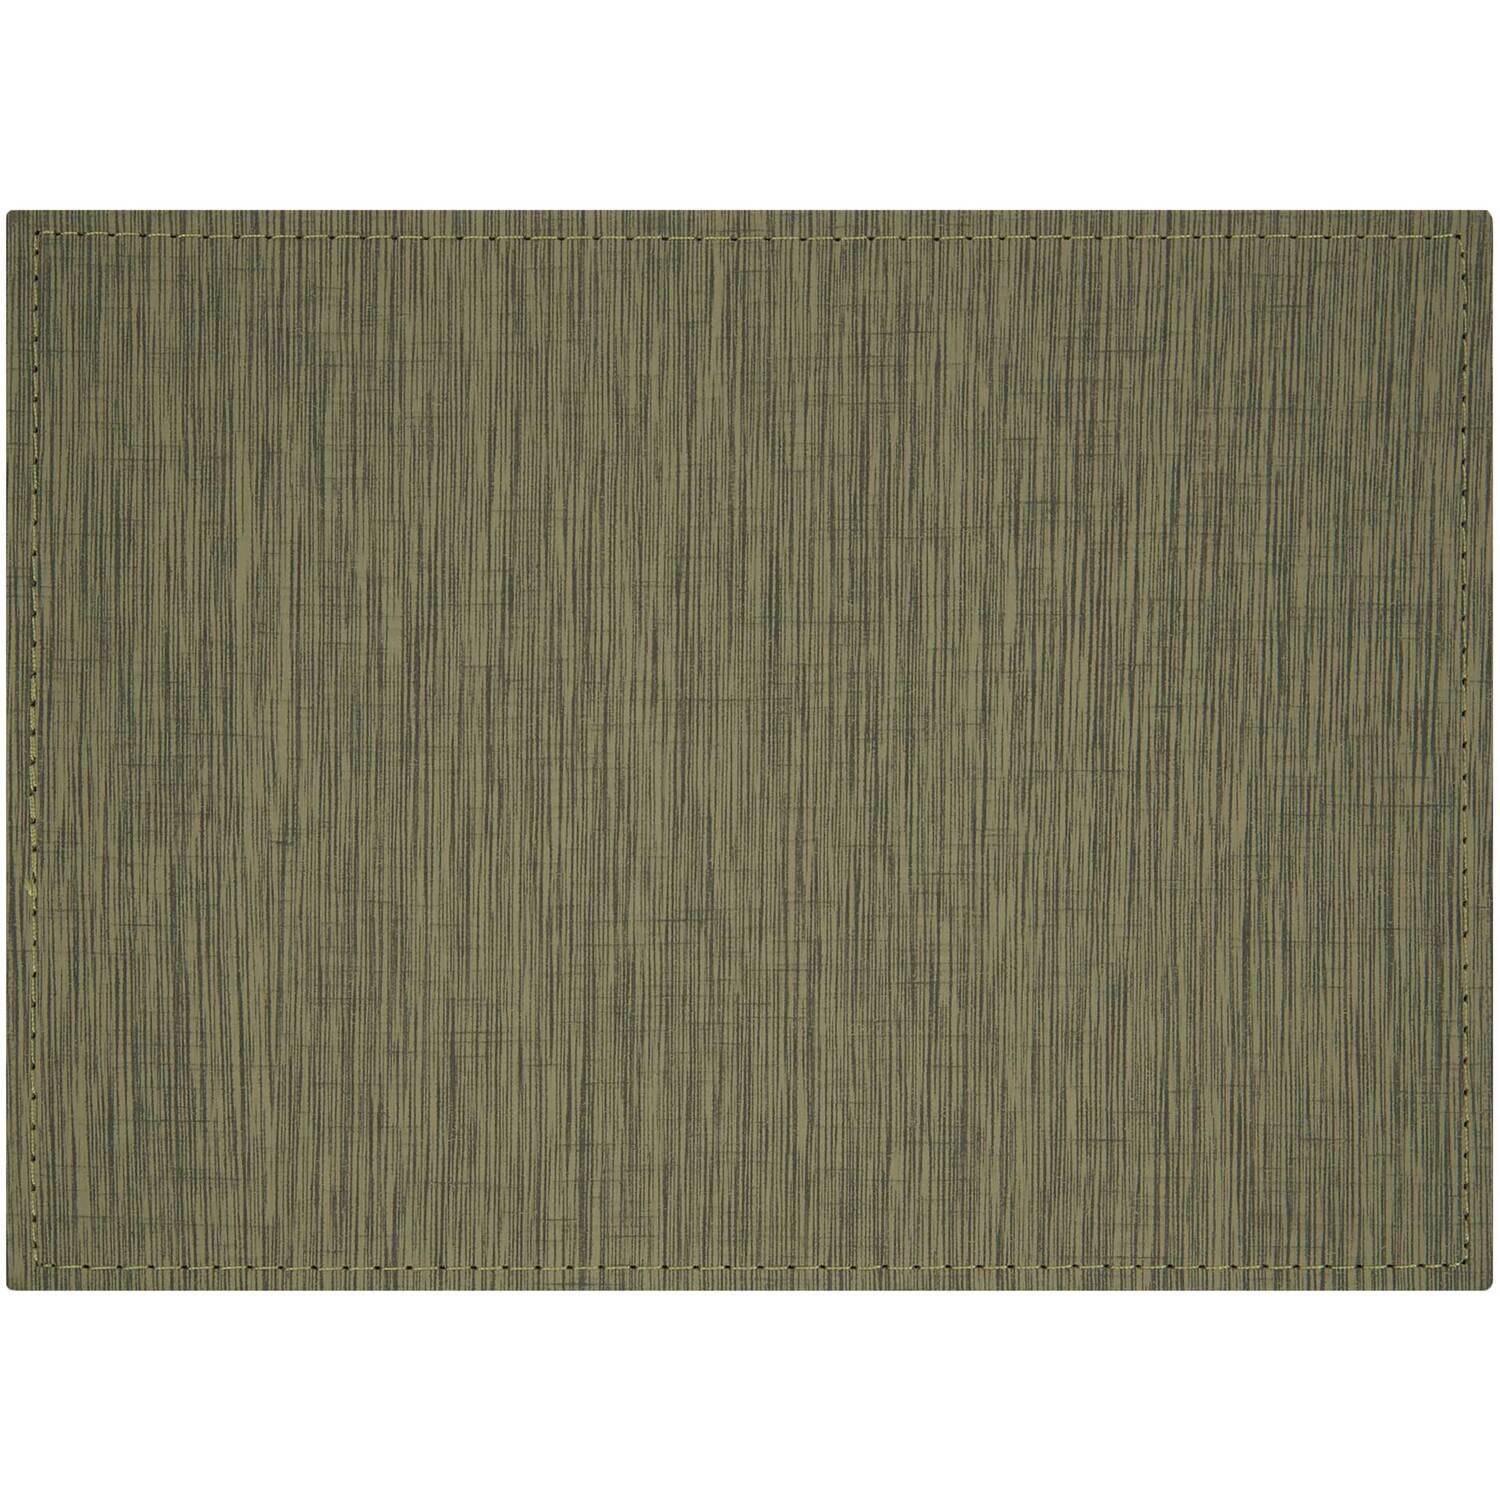 Pack of 4 Linen Texture Placemats - Sage Image 3